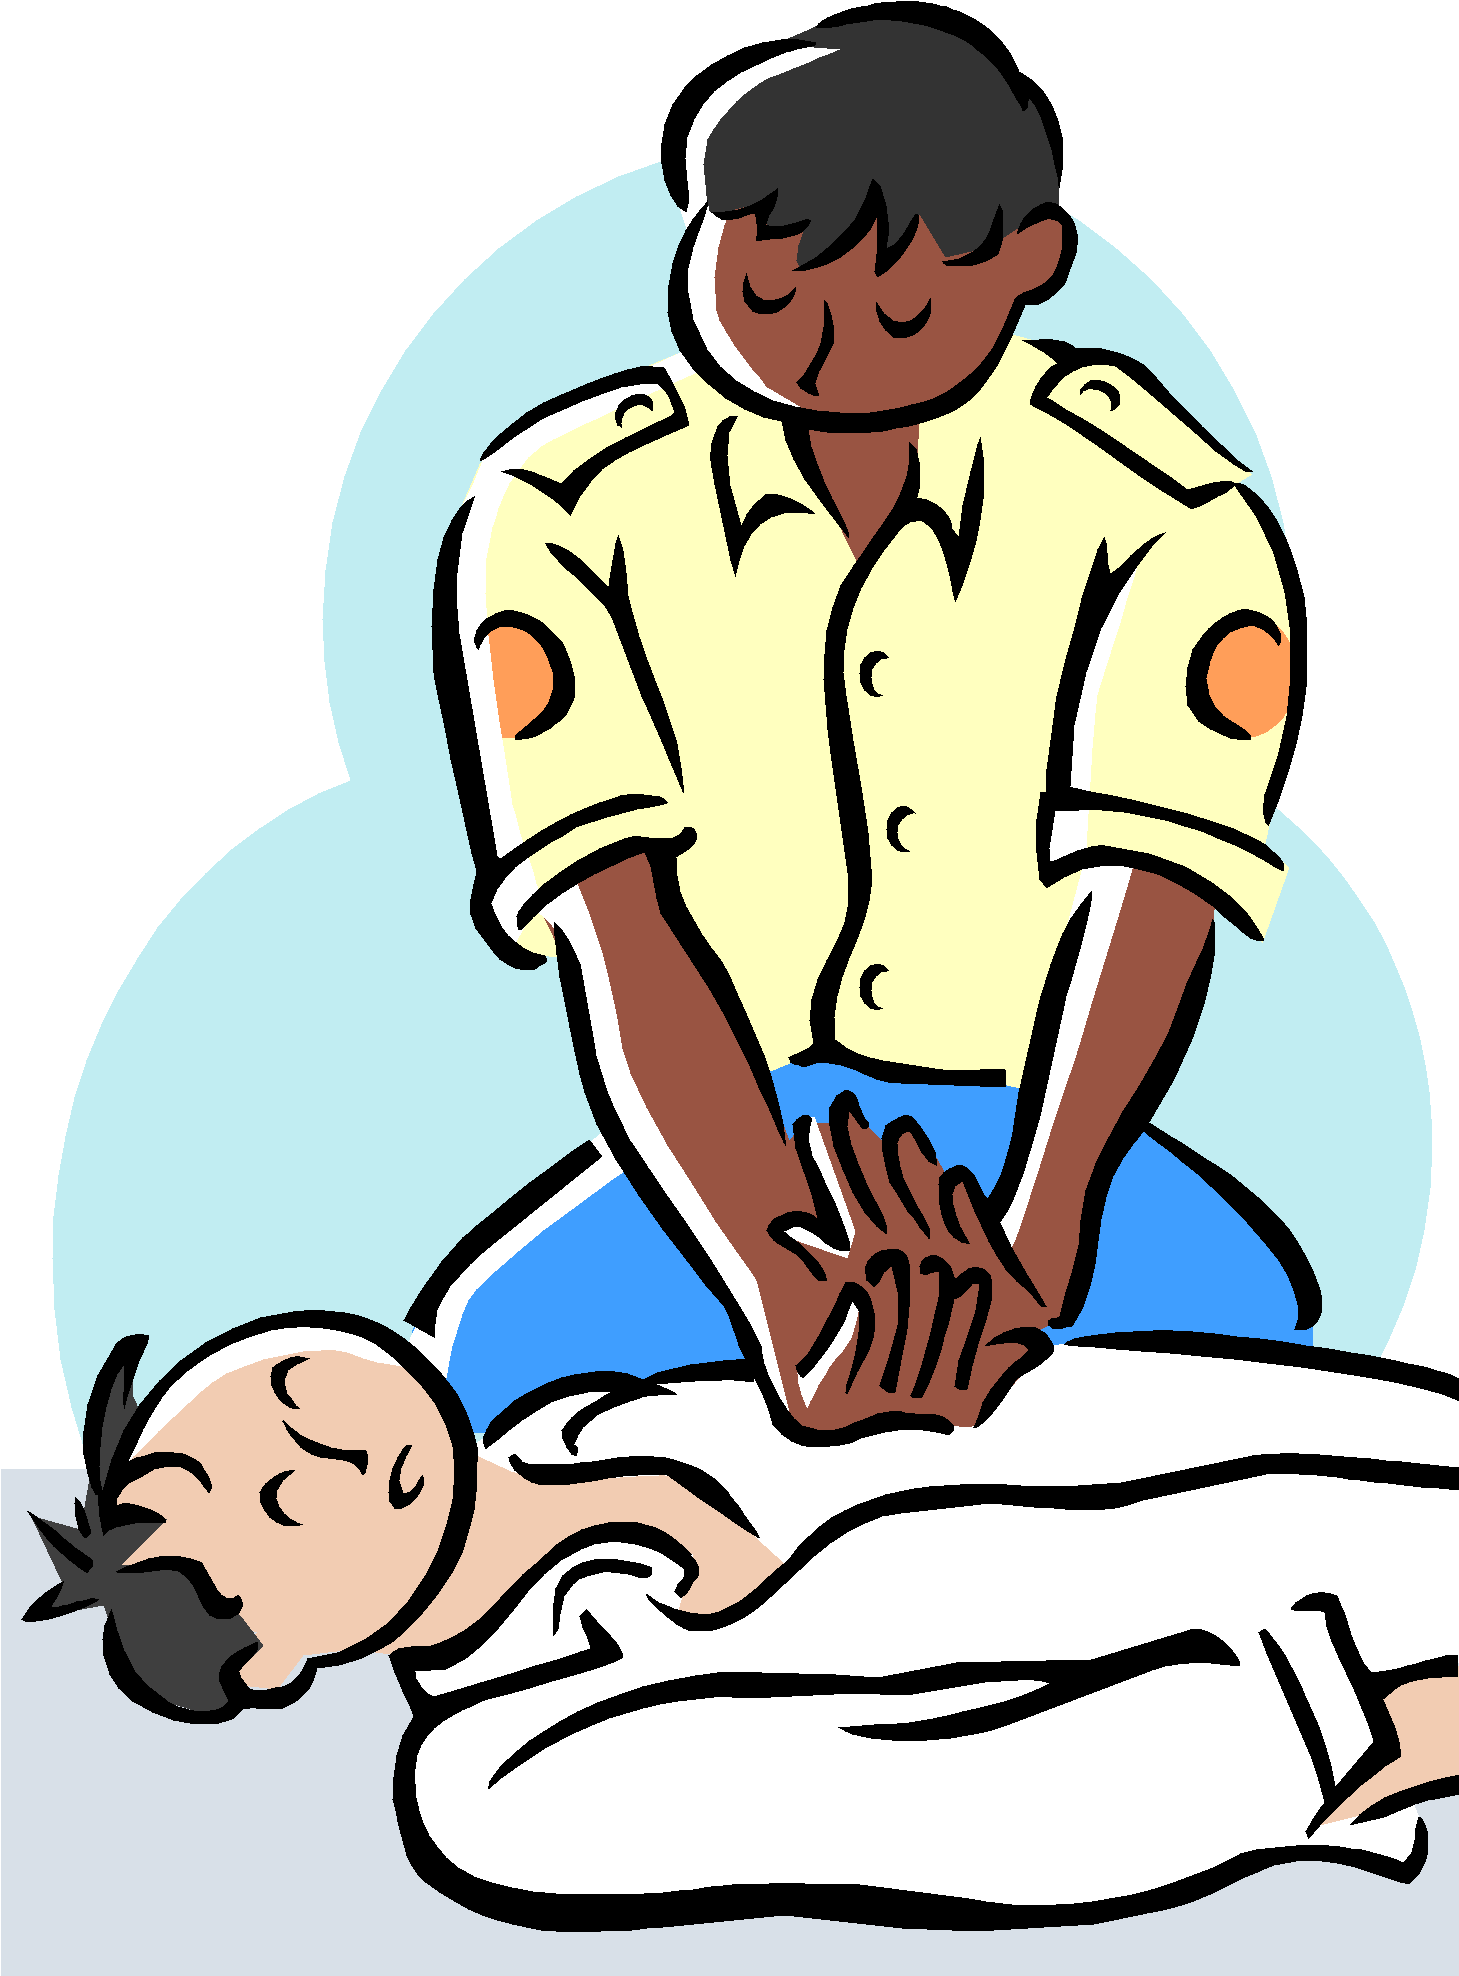 Download and share clipart about Cardiopulmonary Resuscitation First Aid An...